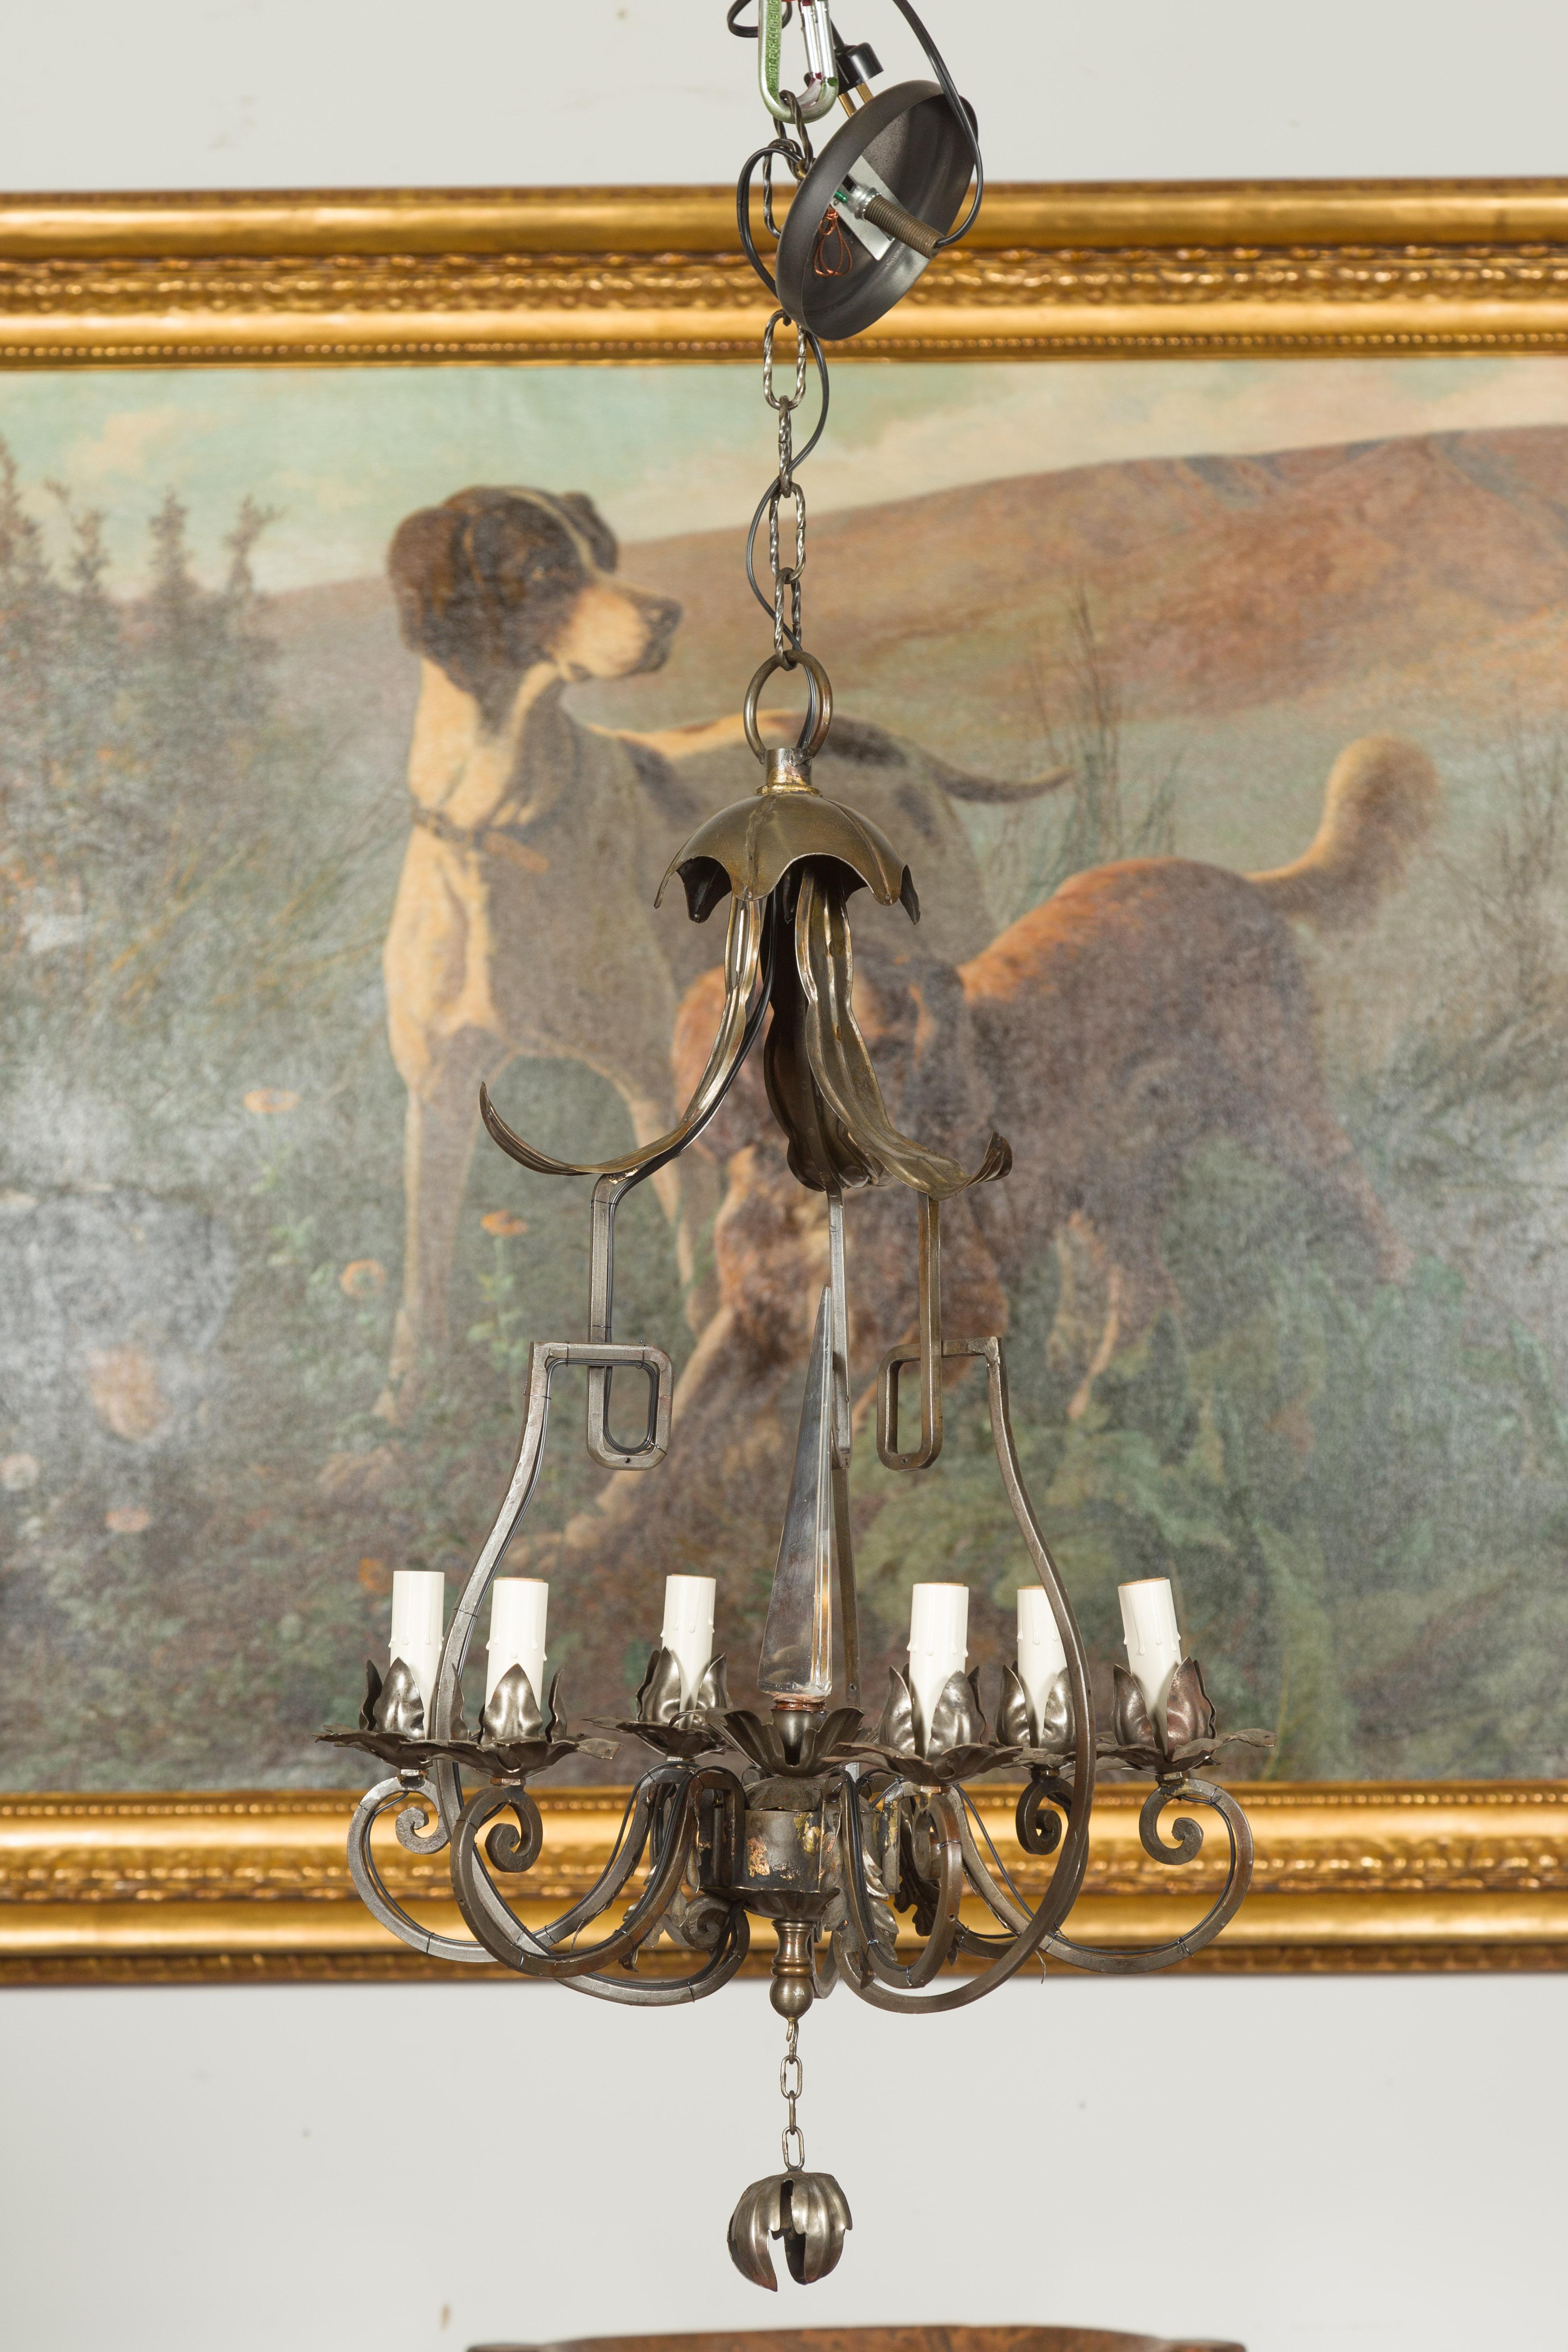 An English vintage polished steel six-light chandelier from the mid-20th century, with scrolling arms and crystal obelisk. Created in England during the midcentury period, this six-light chandelier features a polished steel structure topped with a